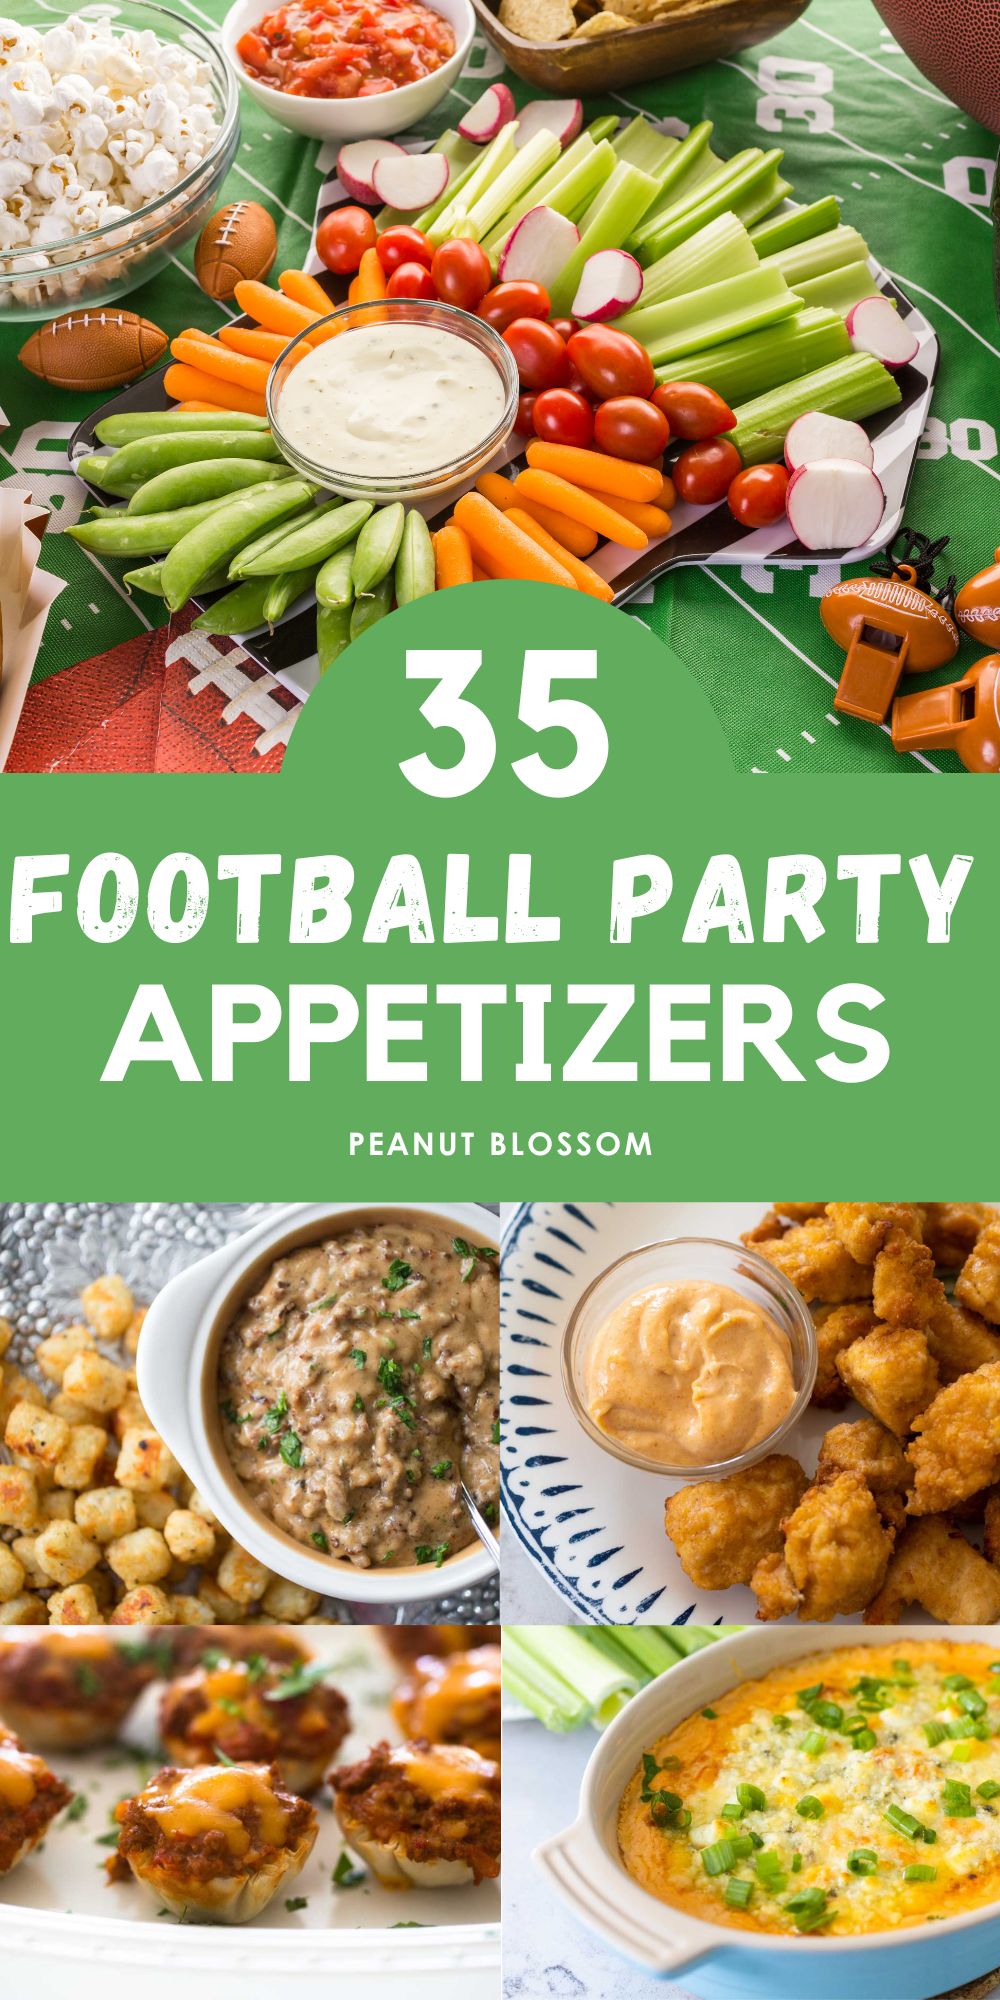 The photo collage shows a party table filled with fresh veggies and dips next to 4 photos of hot appetizers including chicken nuggets and dip, buffalo chicken dip, sausage dip with tater tots, and taco bites.